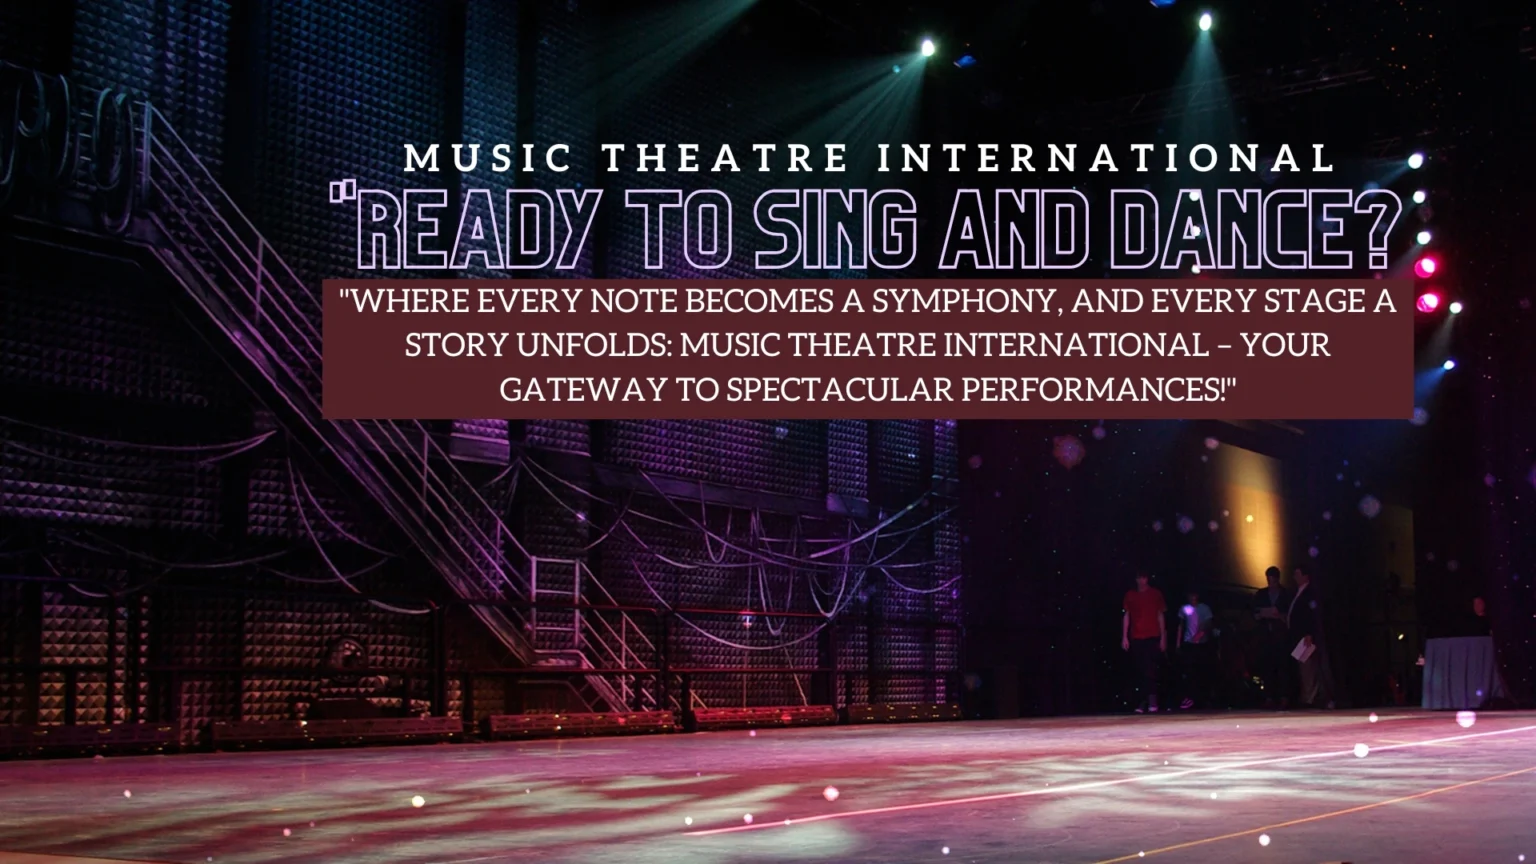 A Musical Theater Adventure: The Key to Unlocking the Mysteries of Music Theatre International